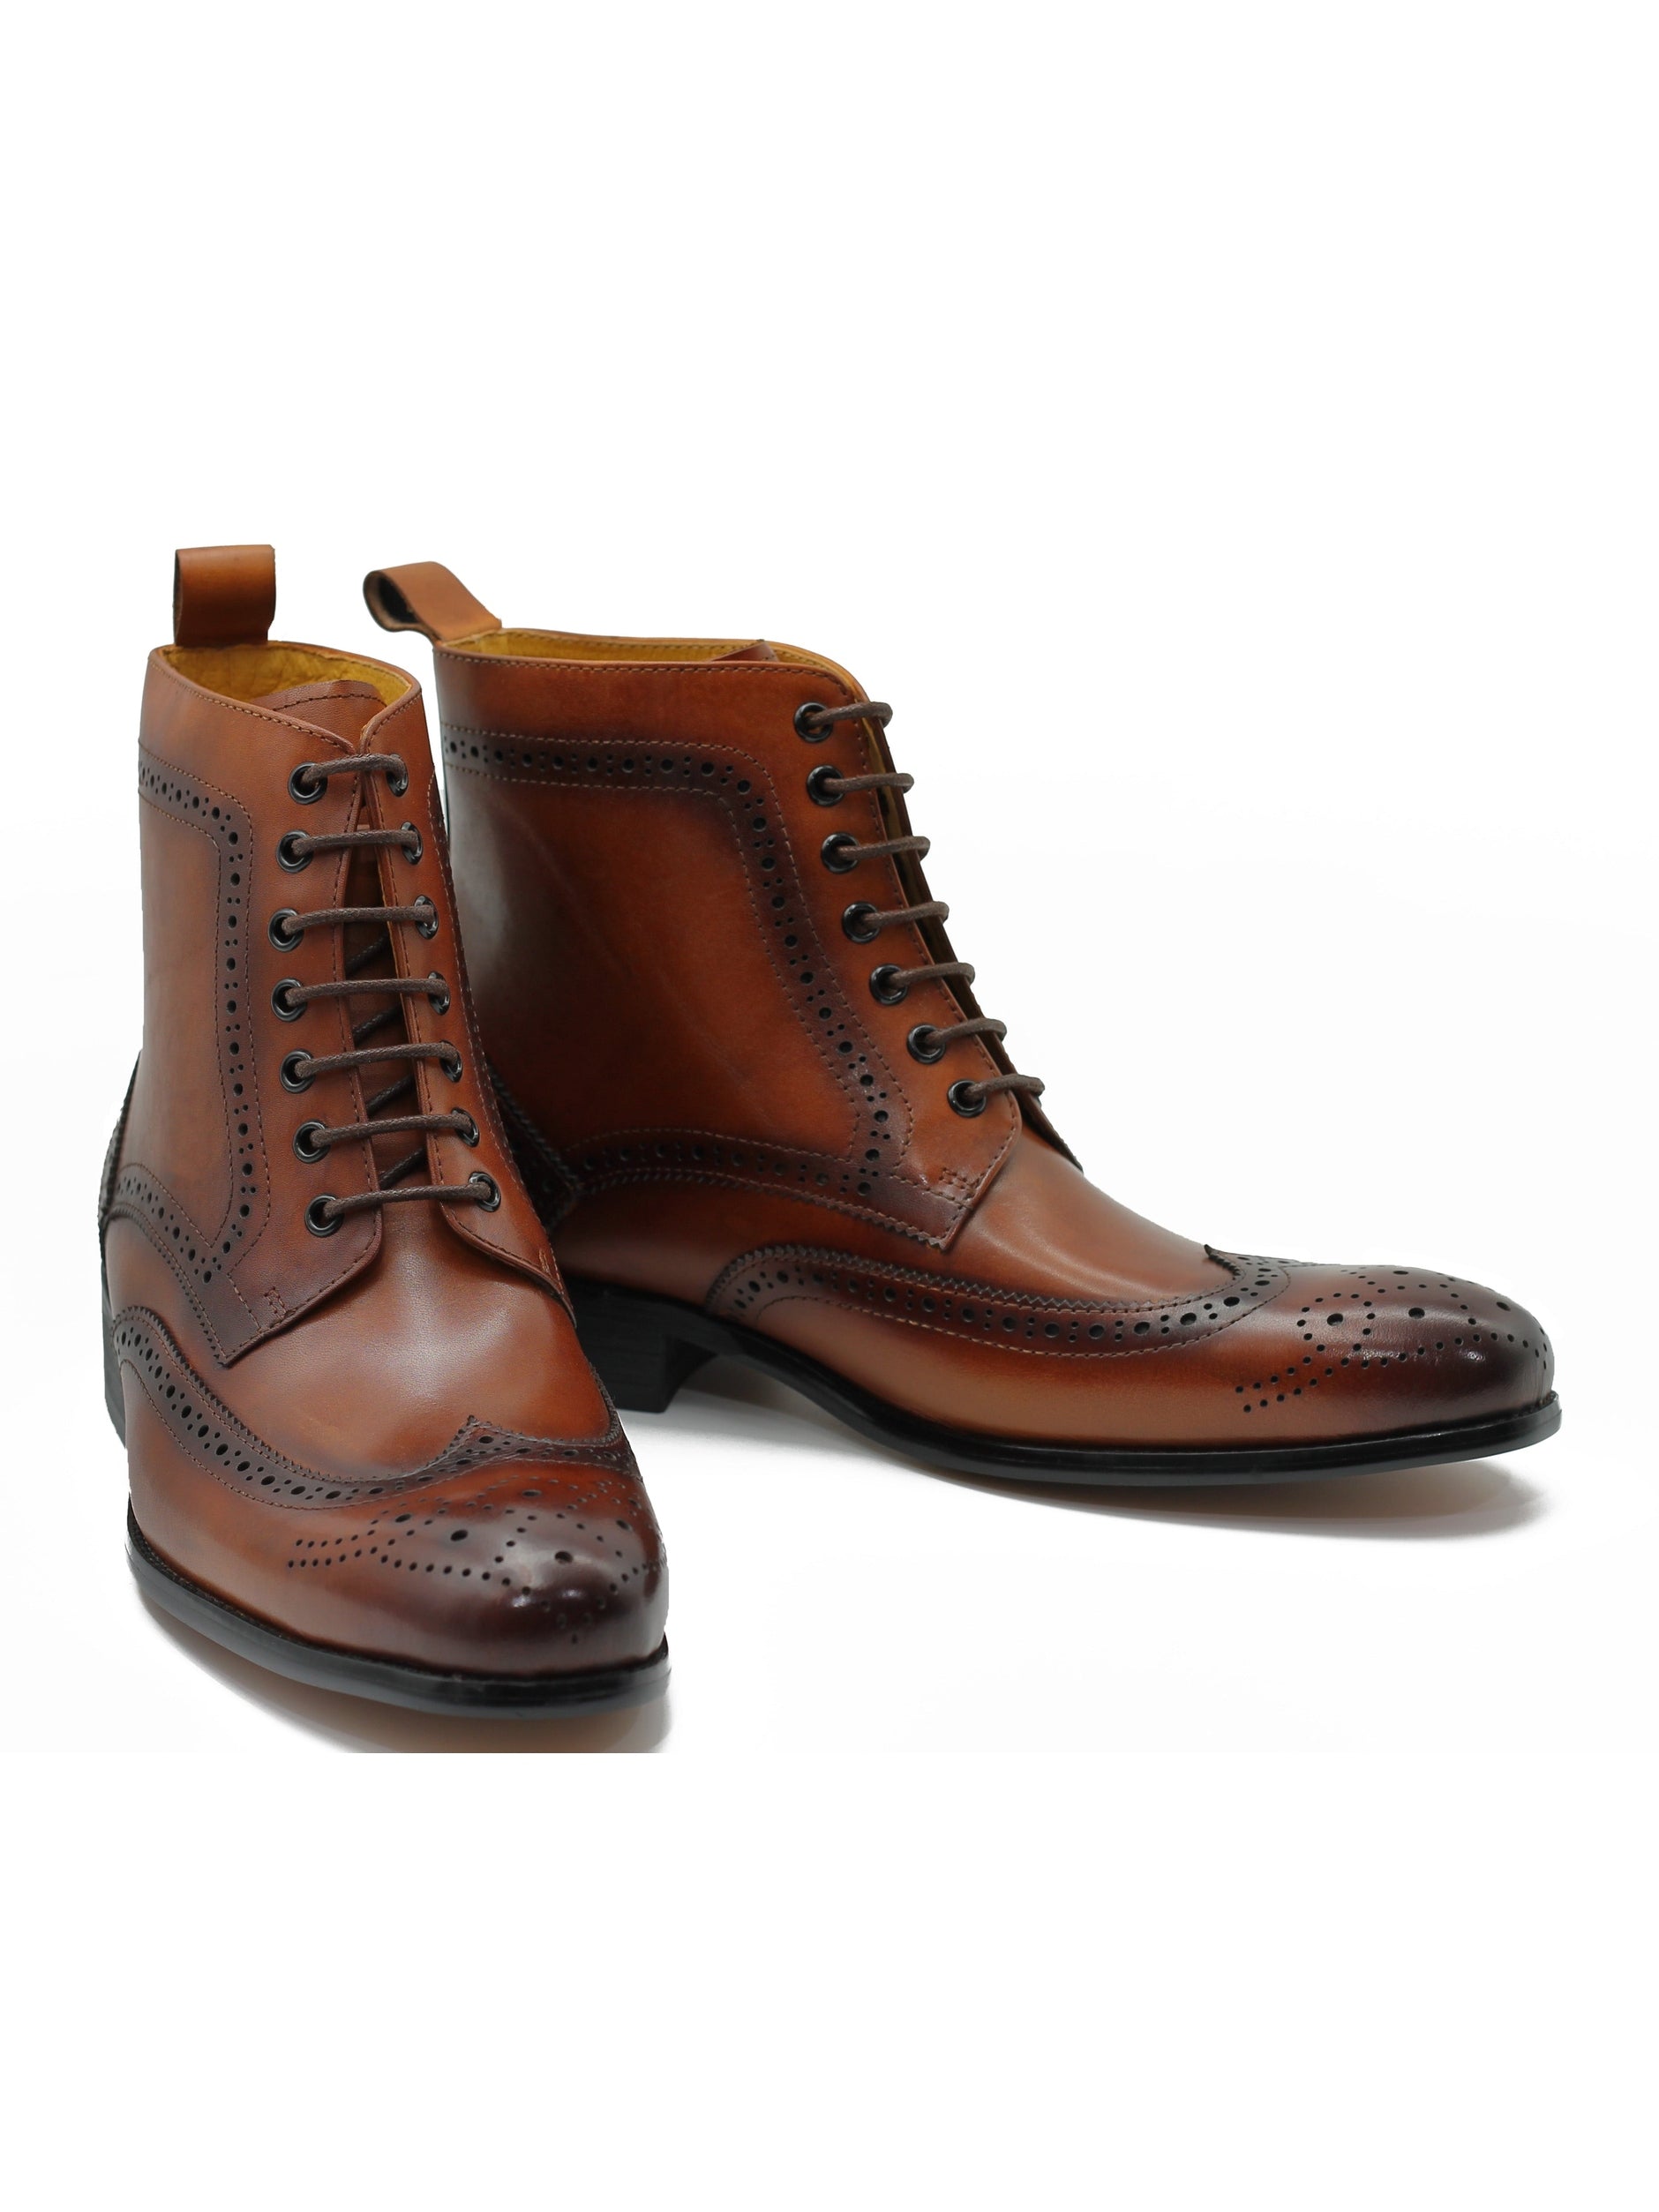 BROWN DERBY LEATHER BOOTS